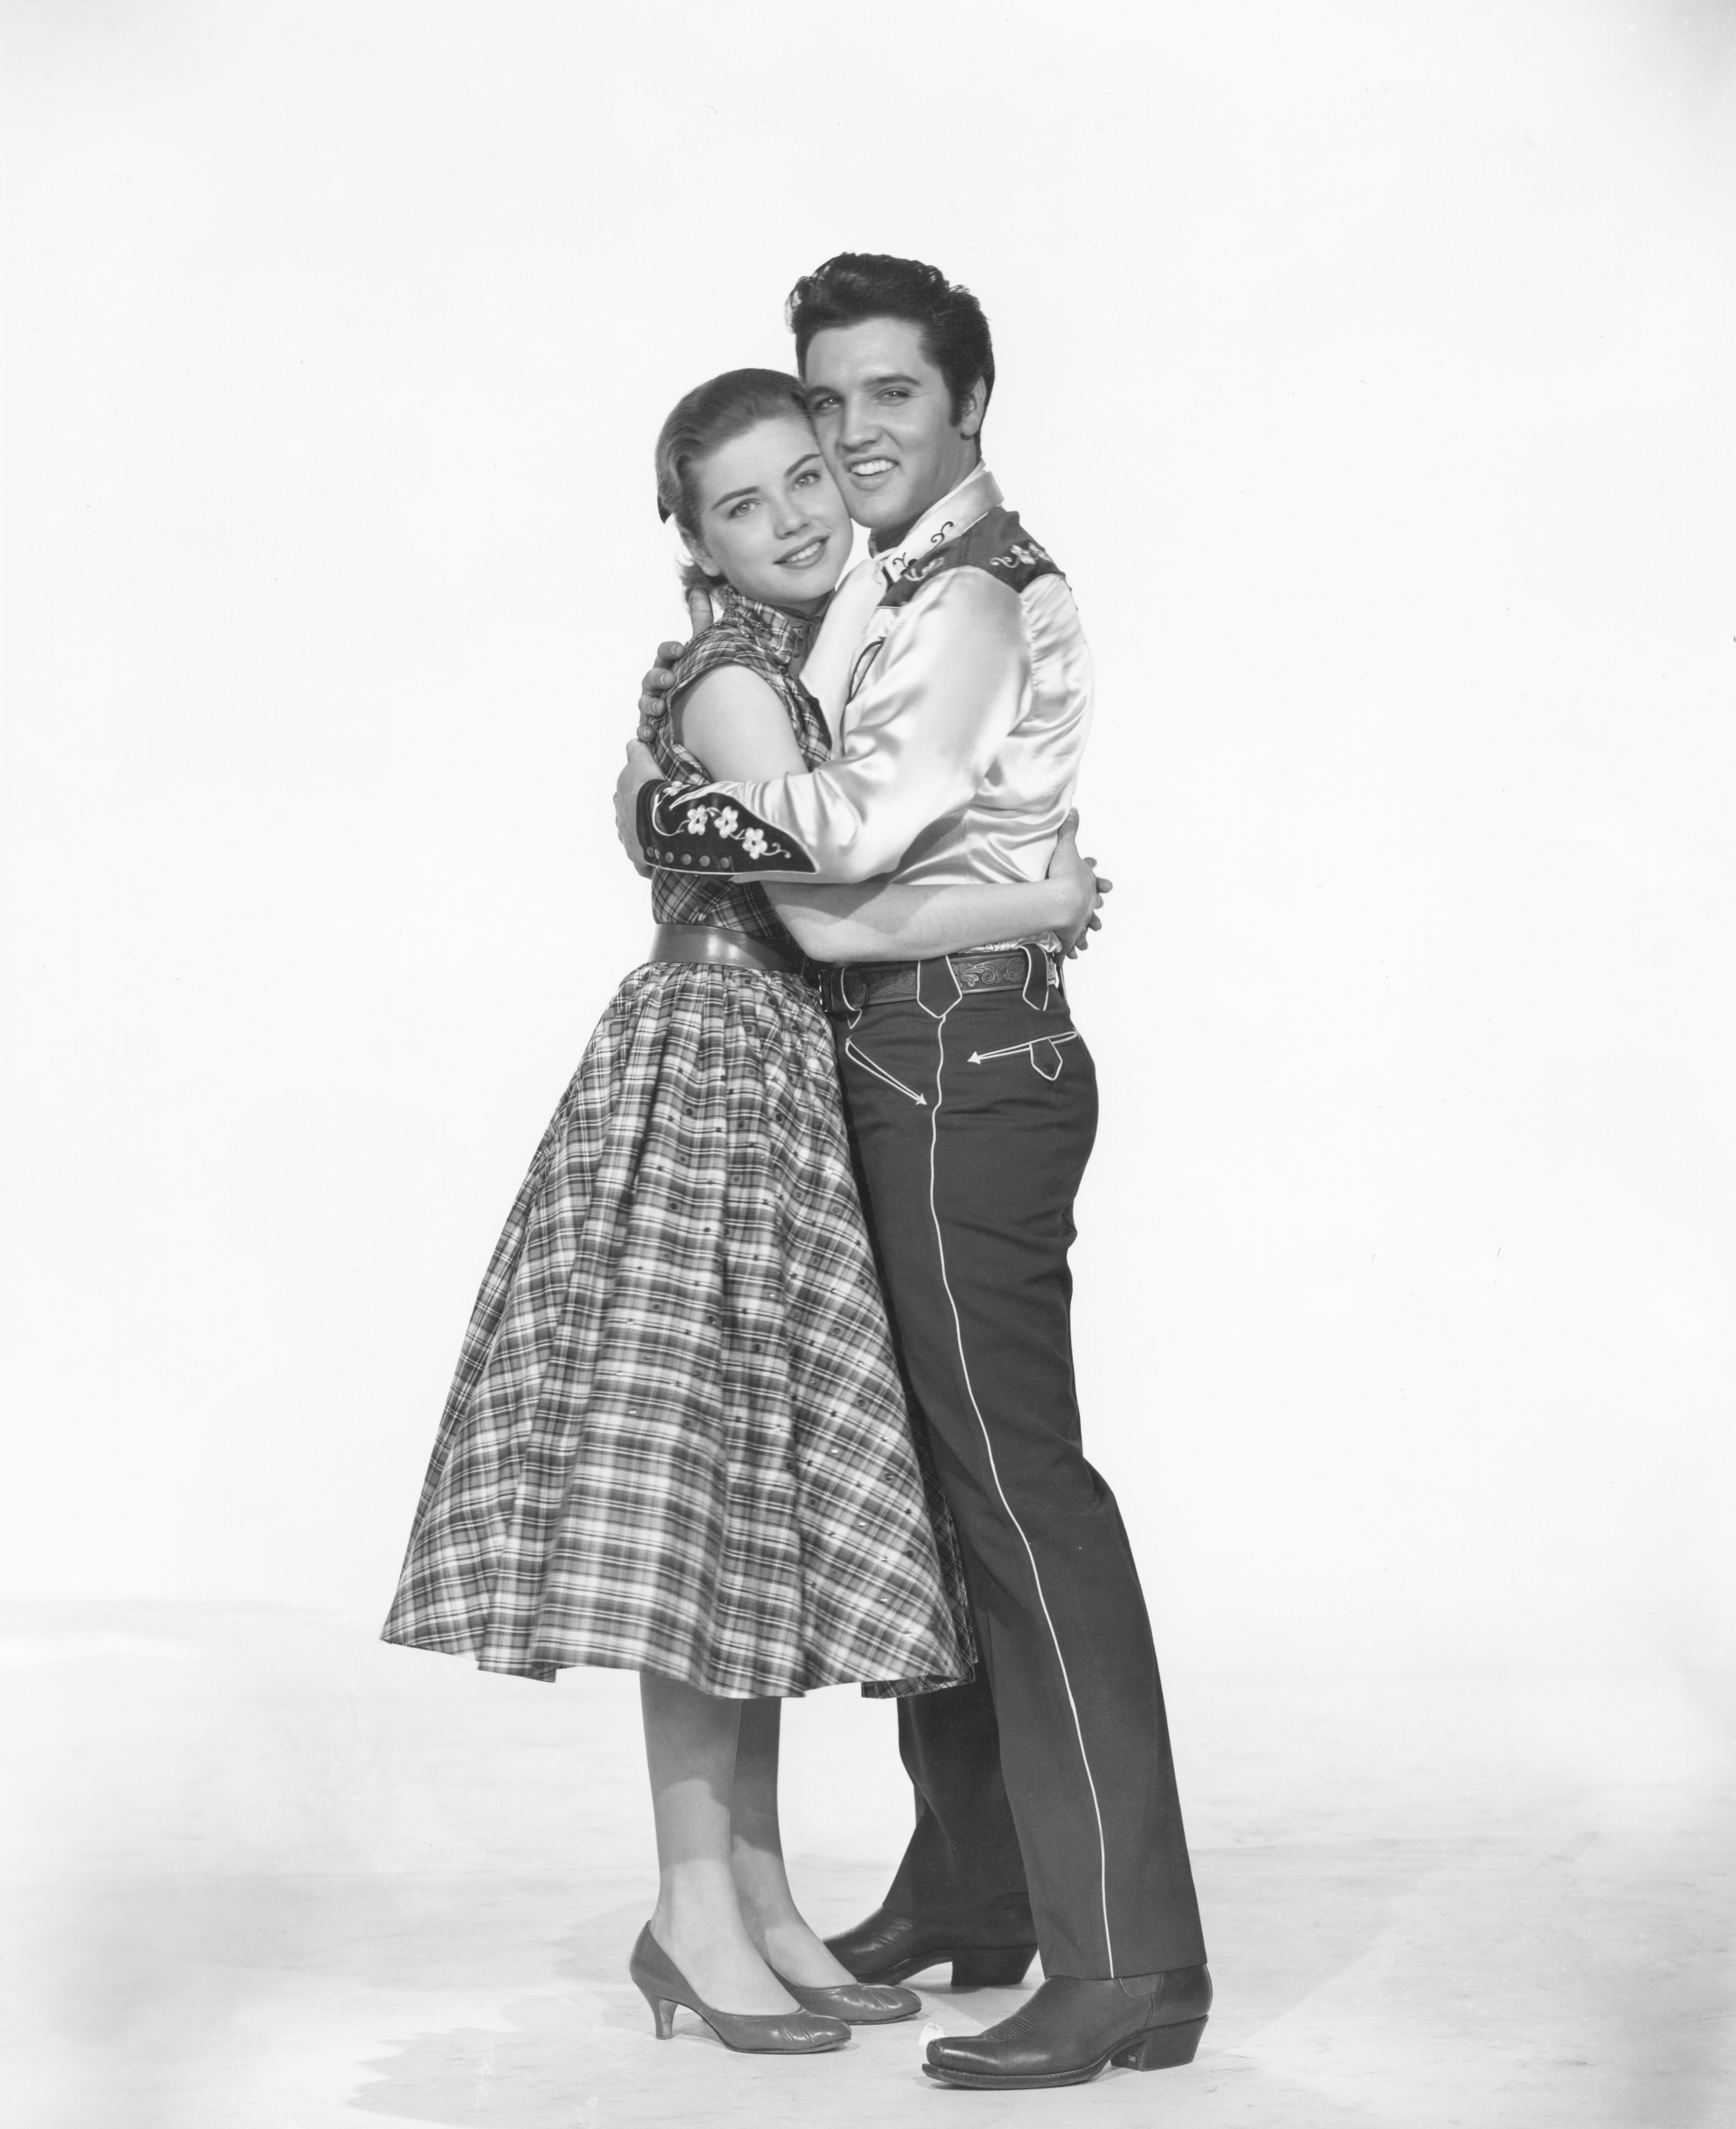 Dolores Hart and Elvis Presley promoting the movie "Loving You" in 1957 | Source: Getty Images